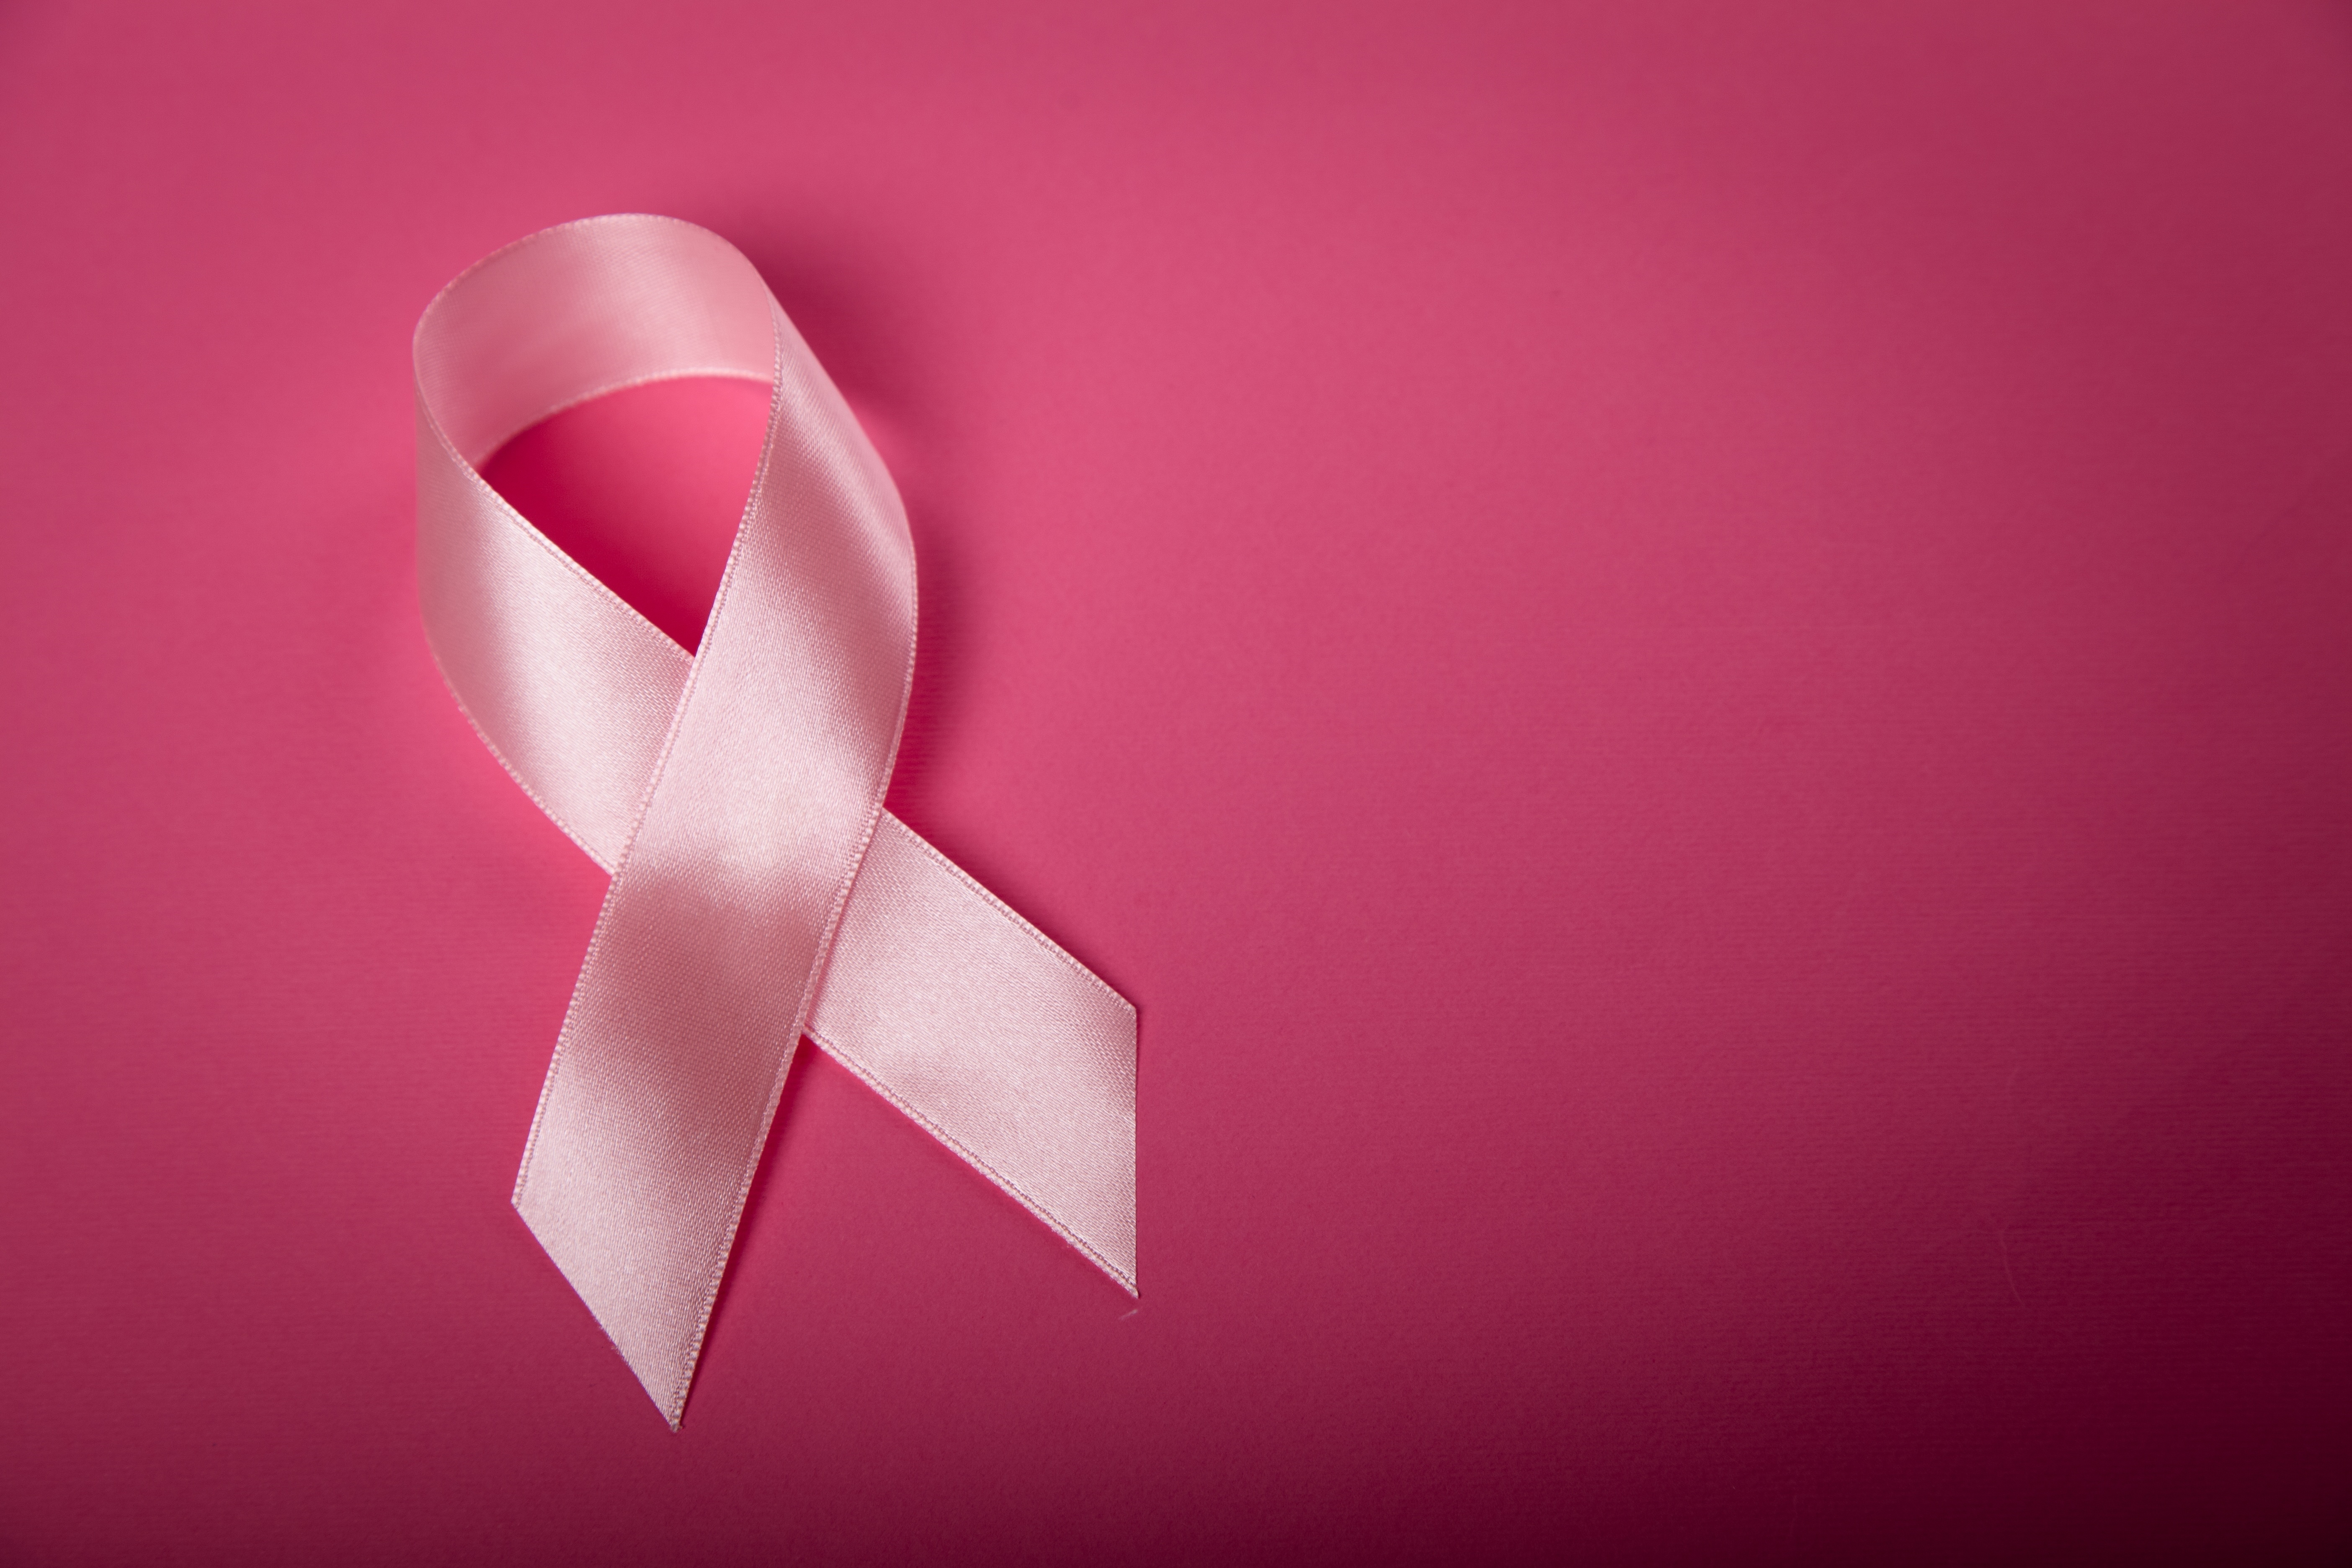 How to Tell if a Doctor Misses a Breast Cancer Diagnosis